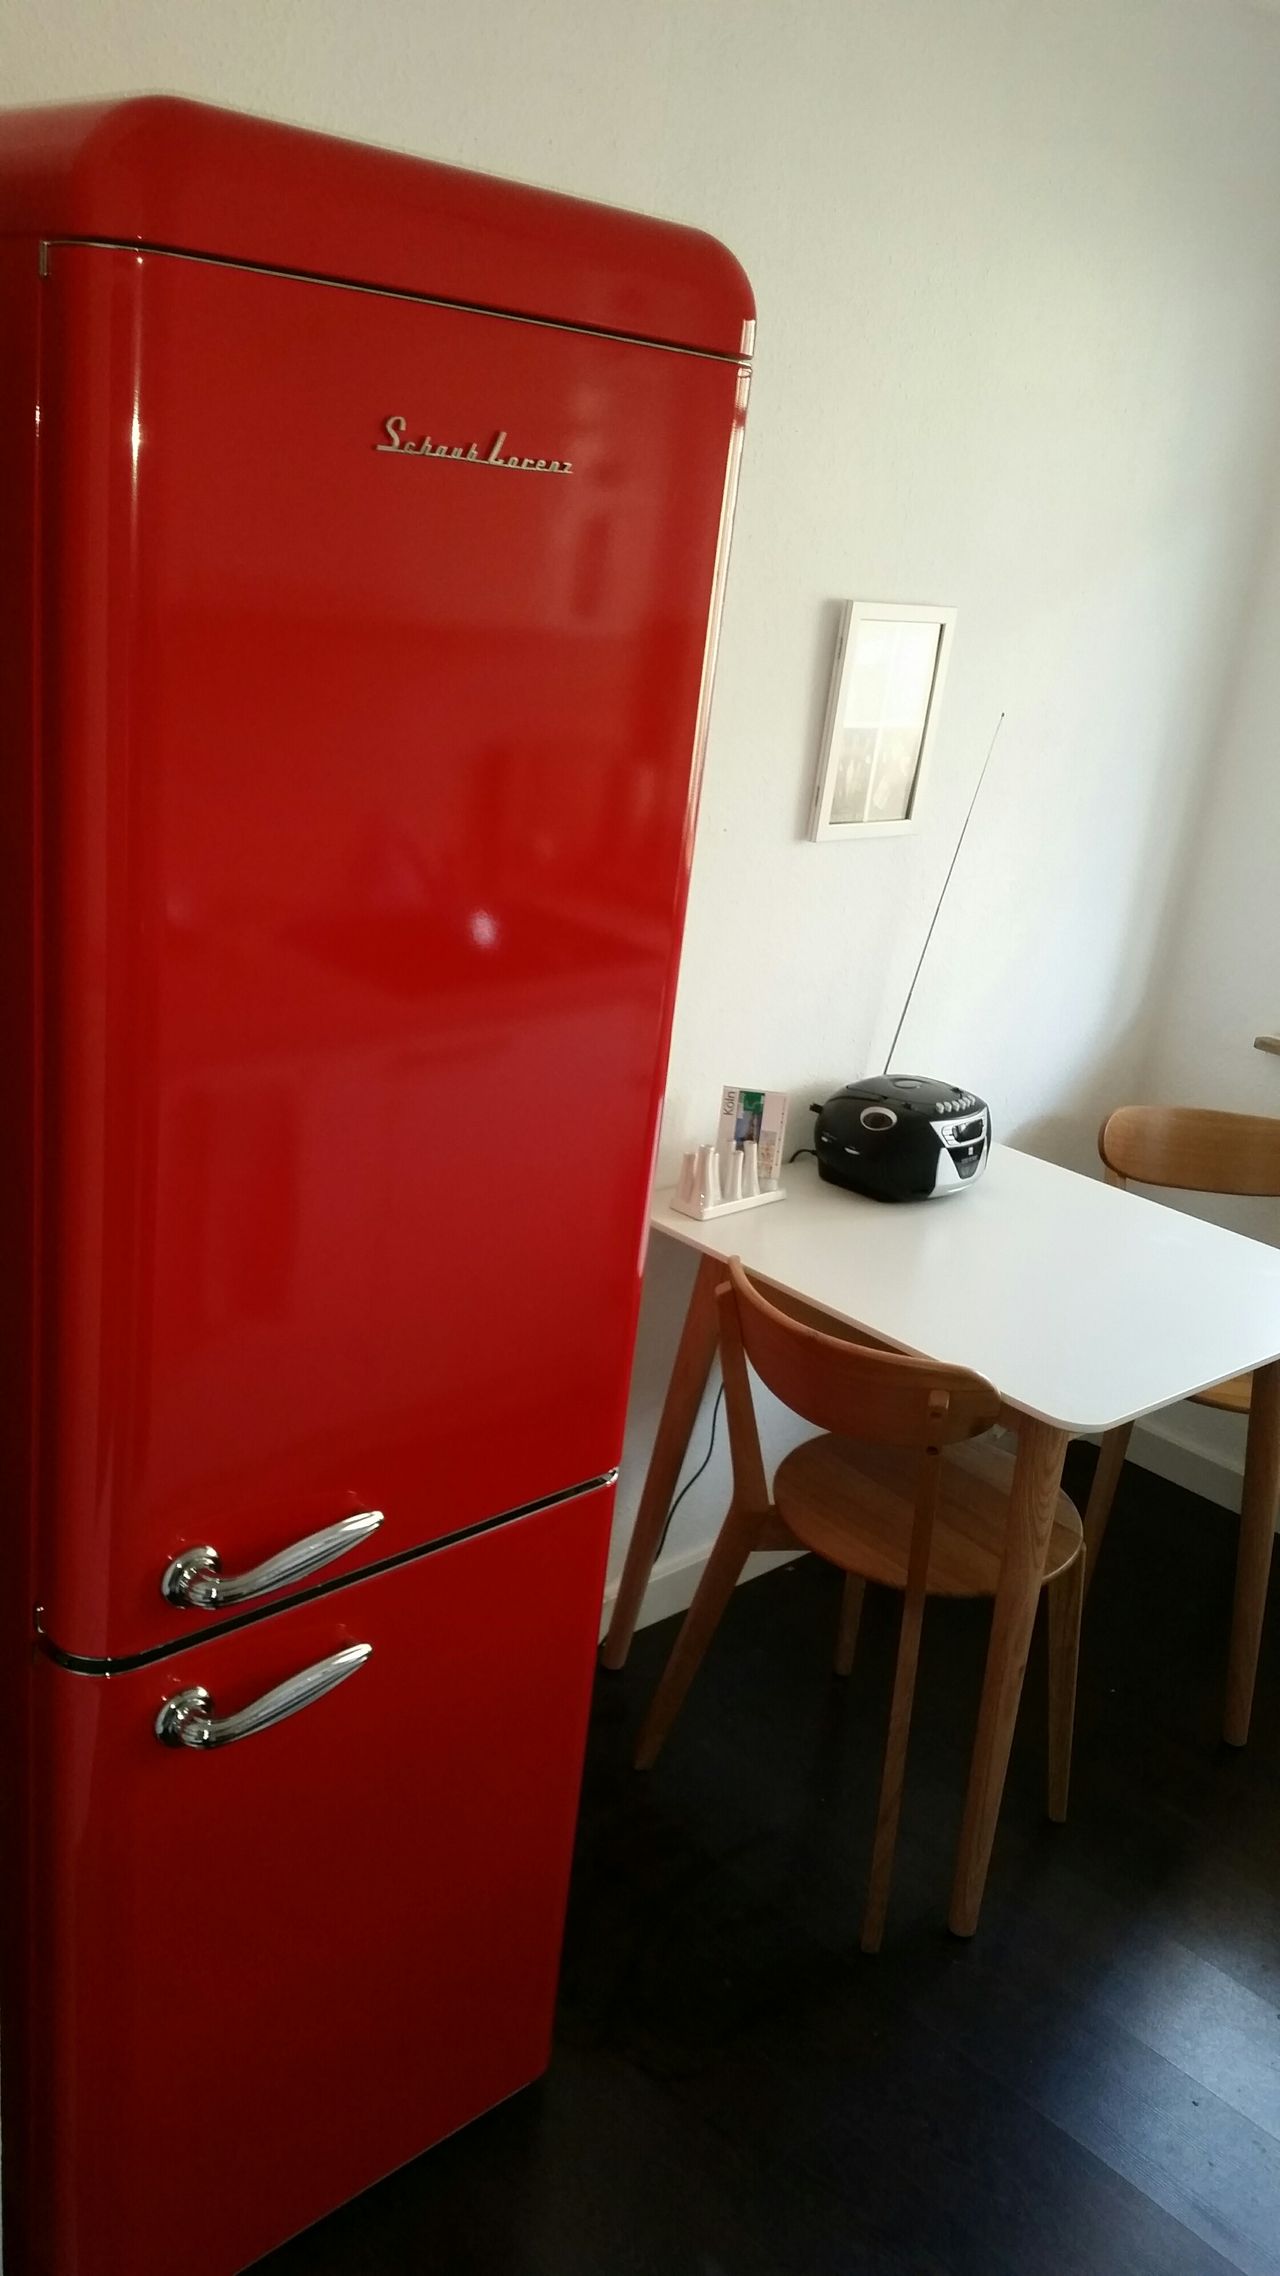 Comfortable apartment near the center and the Rhine to relax